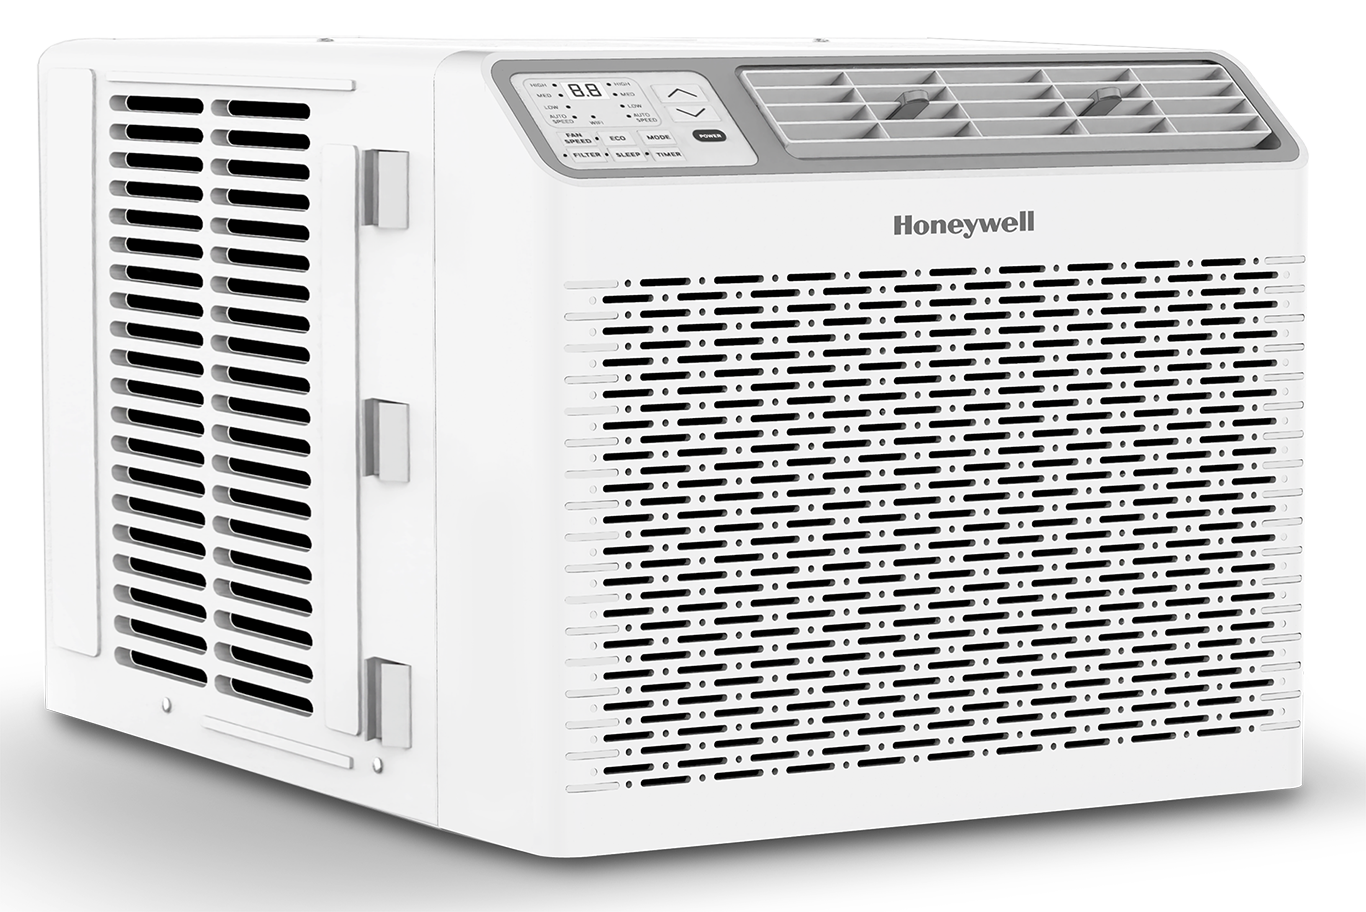 Honeywell 8,000-14,000 BTU Air Conditioner Right Side View